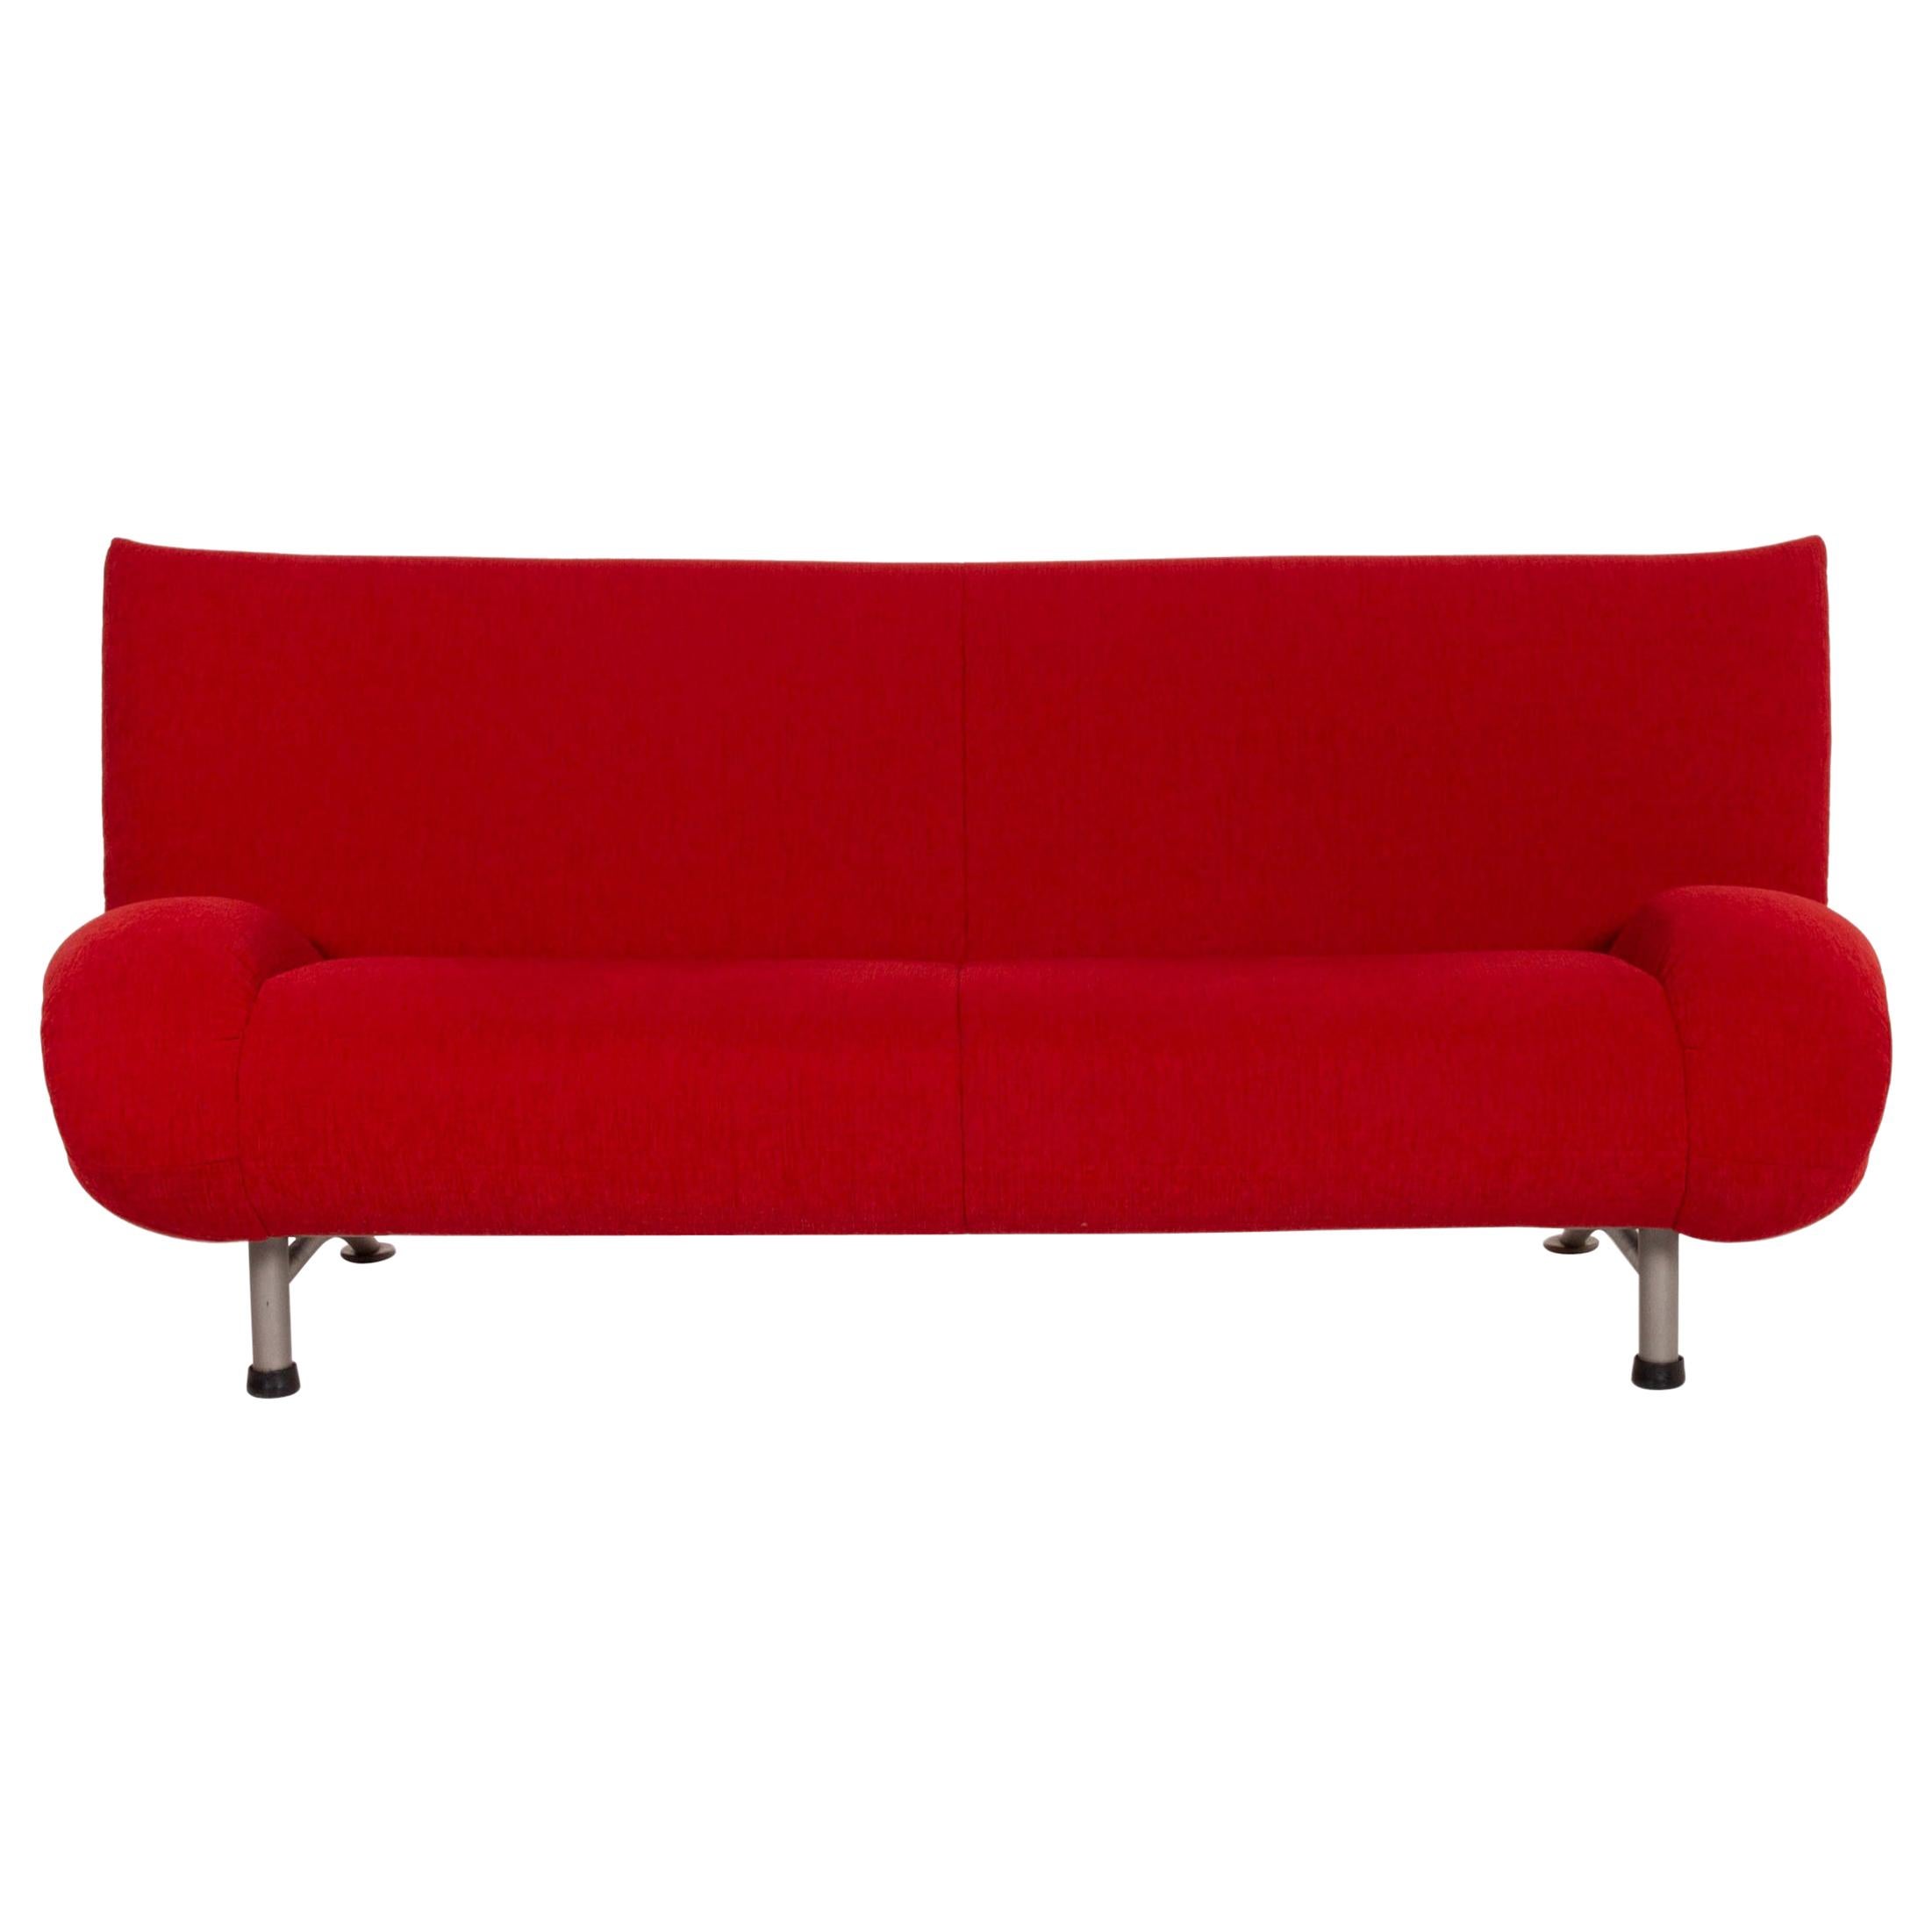 Rolf Benz Fabric Sofa Red Three-seater Couch